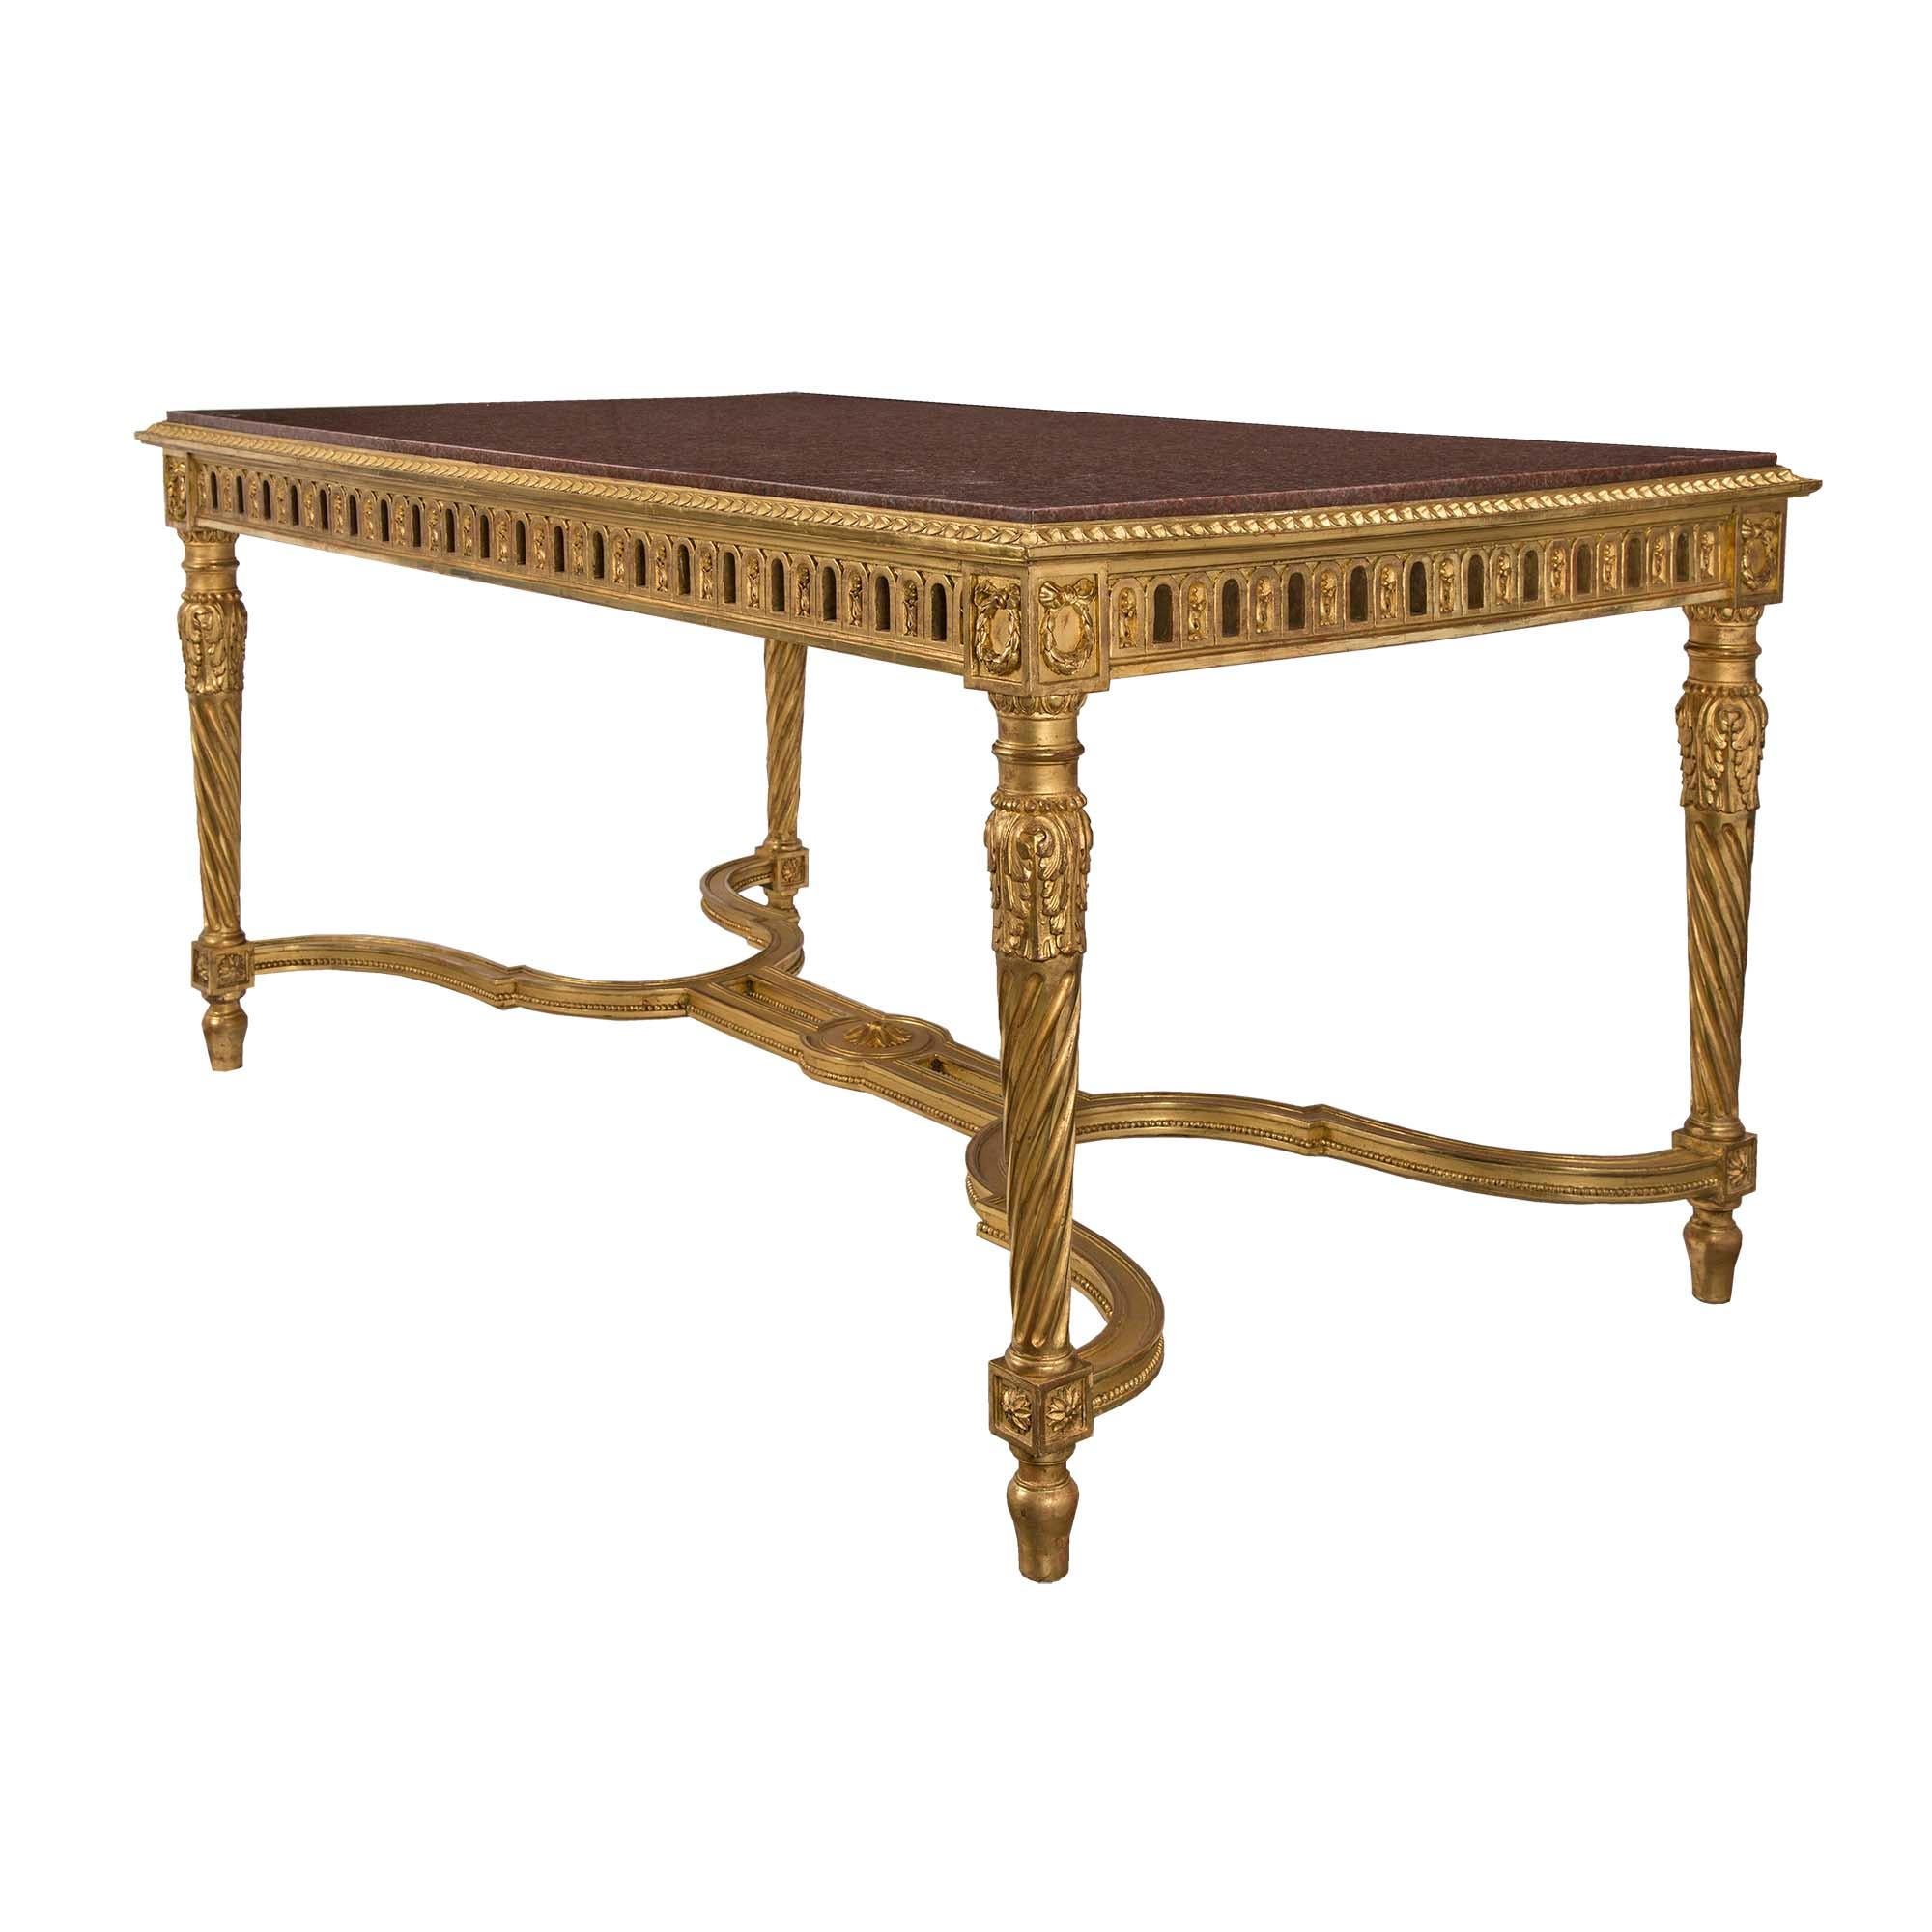 French 19th Century Louis XVI Style Giltwood and Marble Center Table In Good Condition For Sale In West Palm Beach, FL